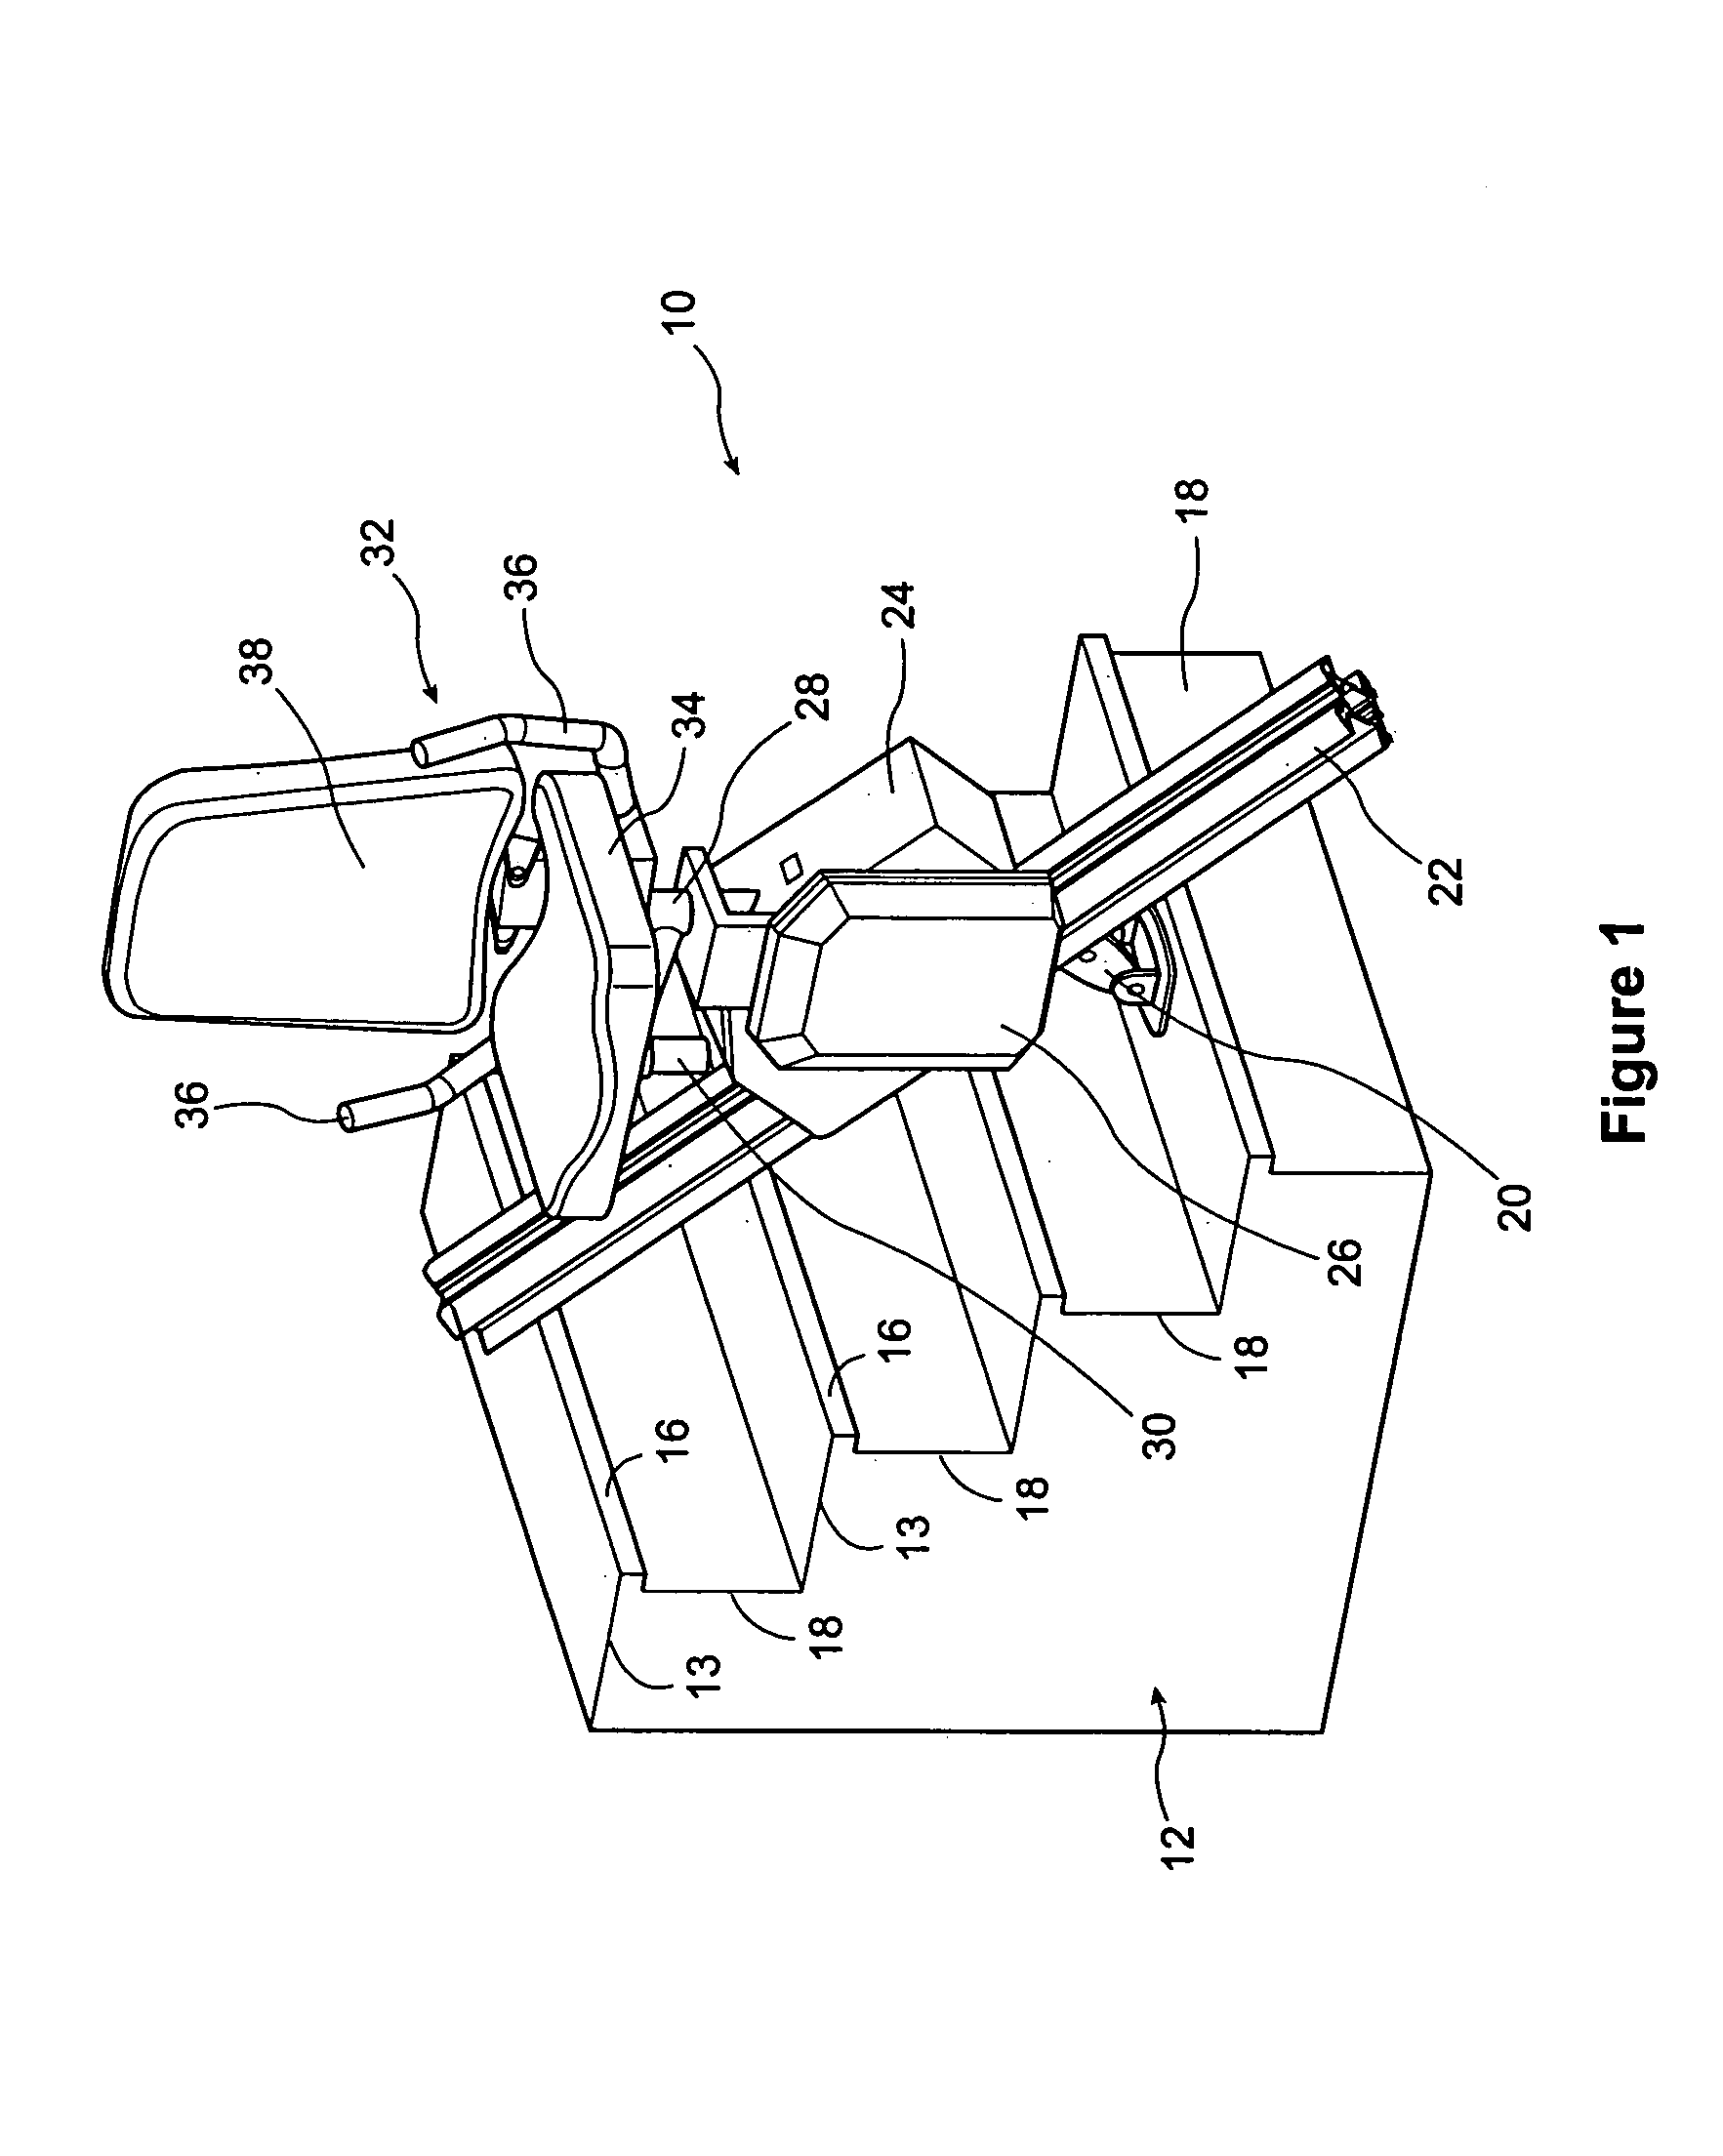 Stair lift device